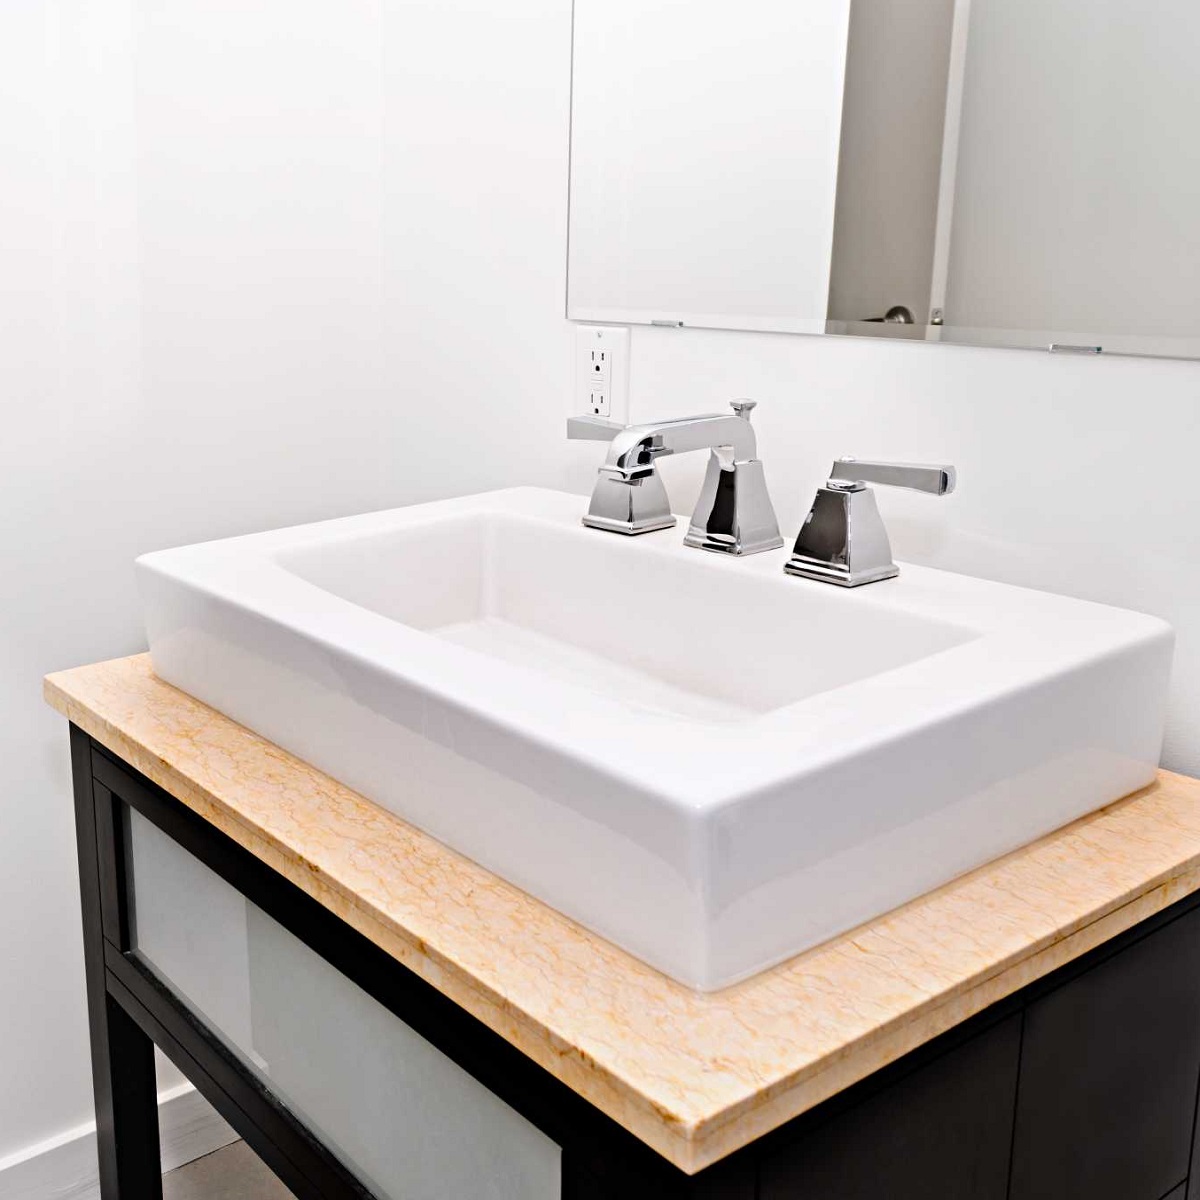 What Is The Standard Height For A Vanity Drain